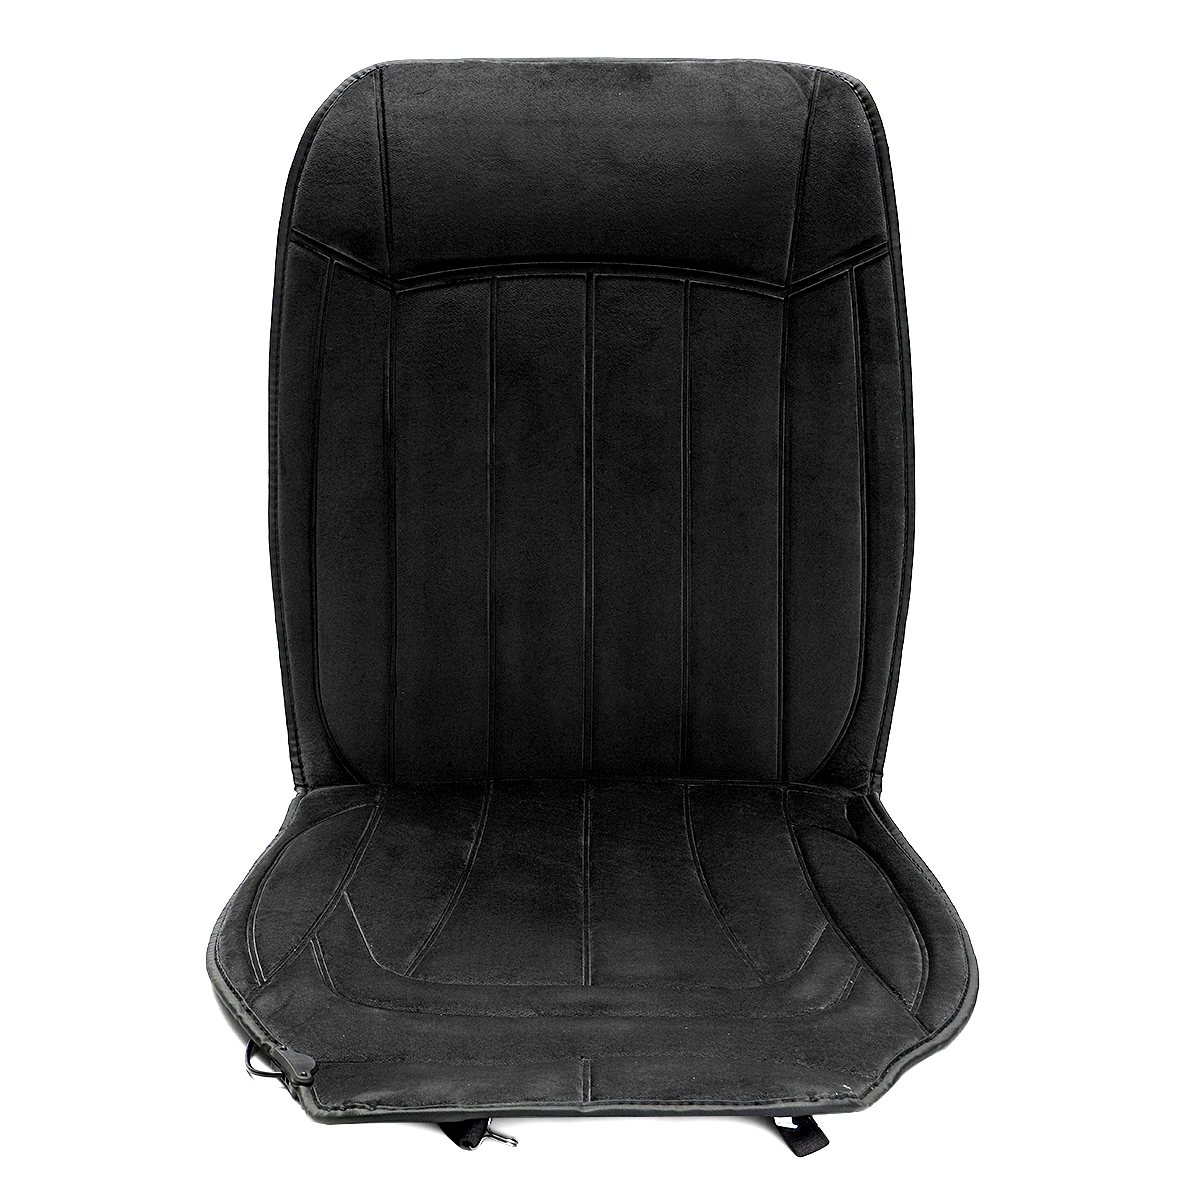 12v Electric Fleeced Car Heated Seat Cushion Cover Seat Heater